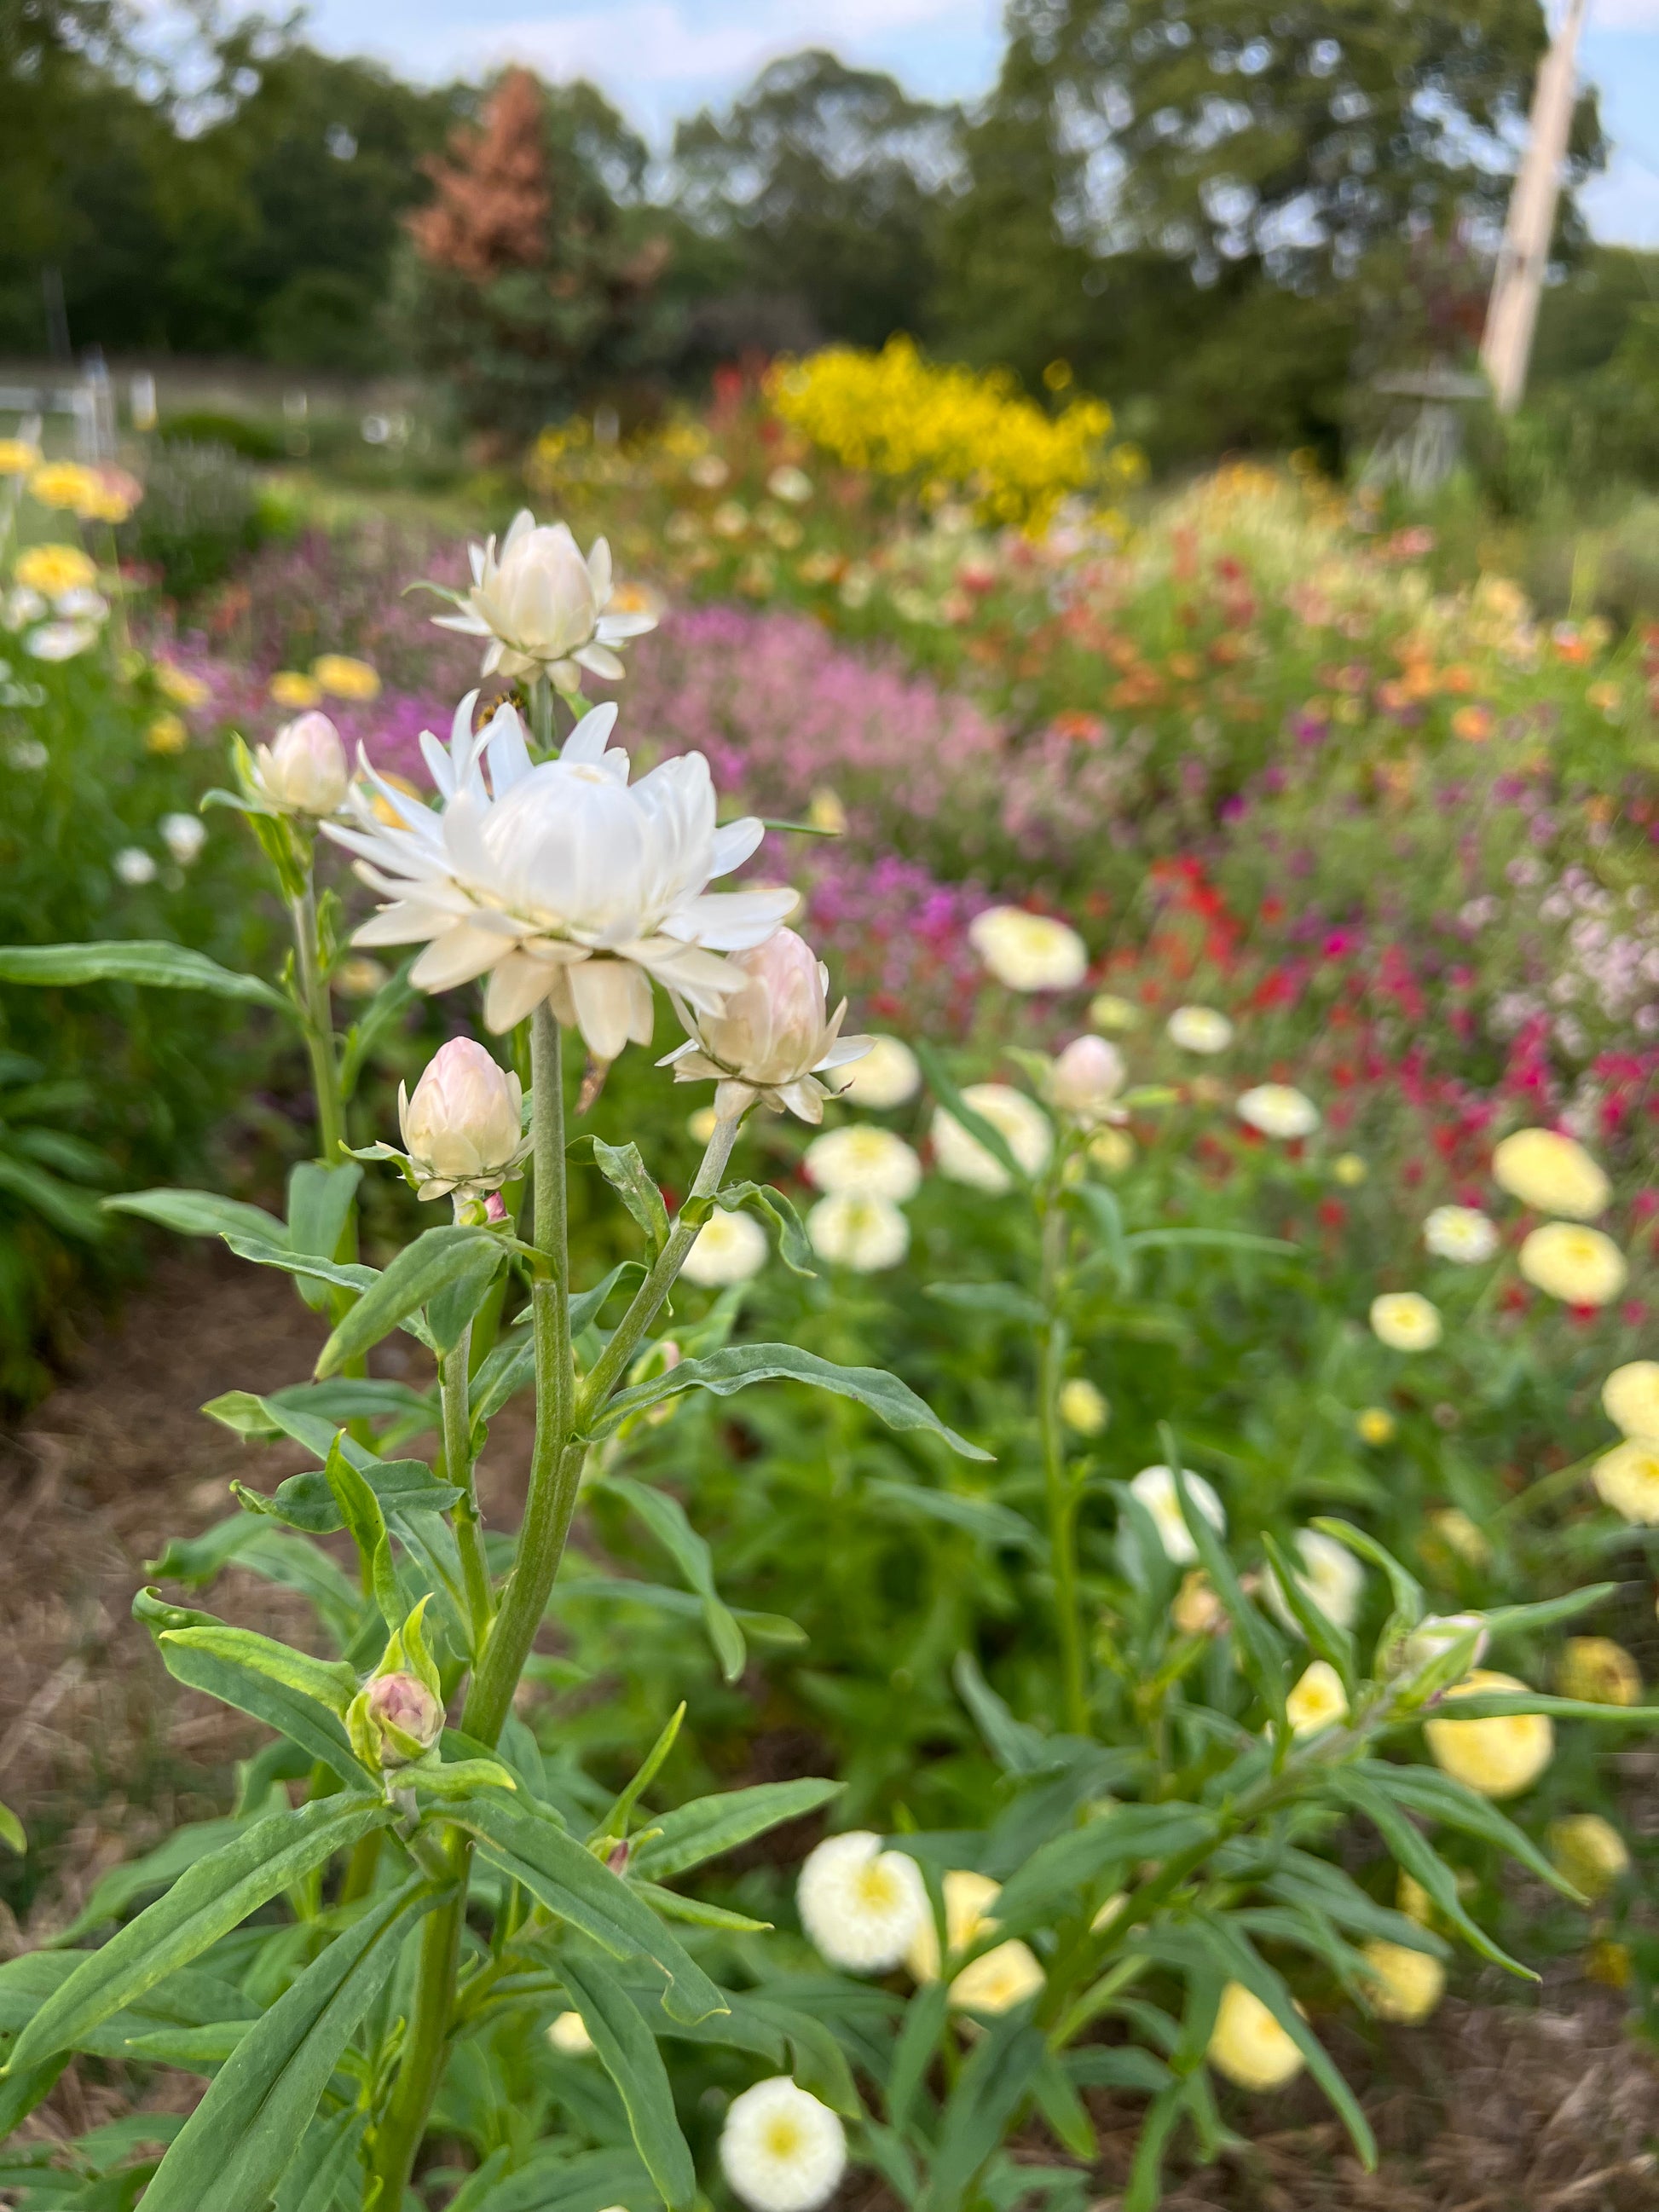 How to Grow Strawflowers For Your Cut Flower Garden From Seed